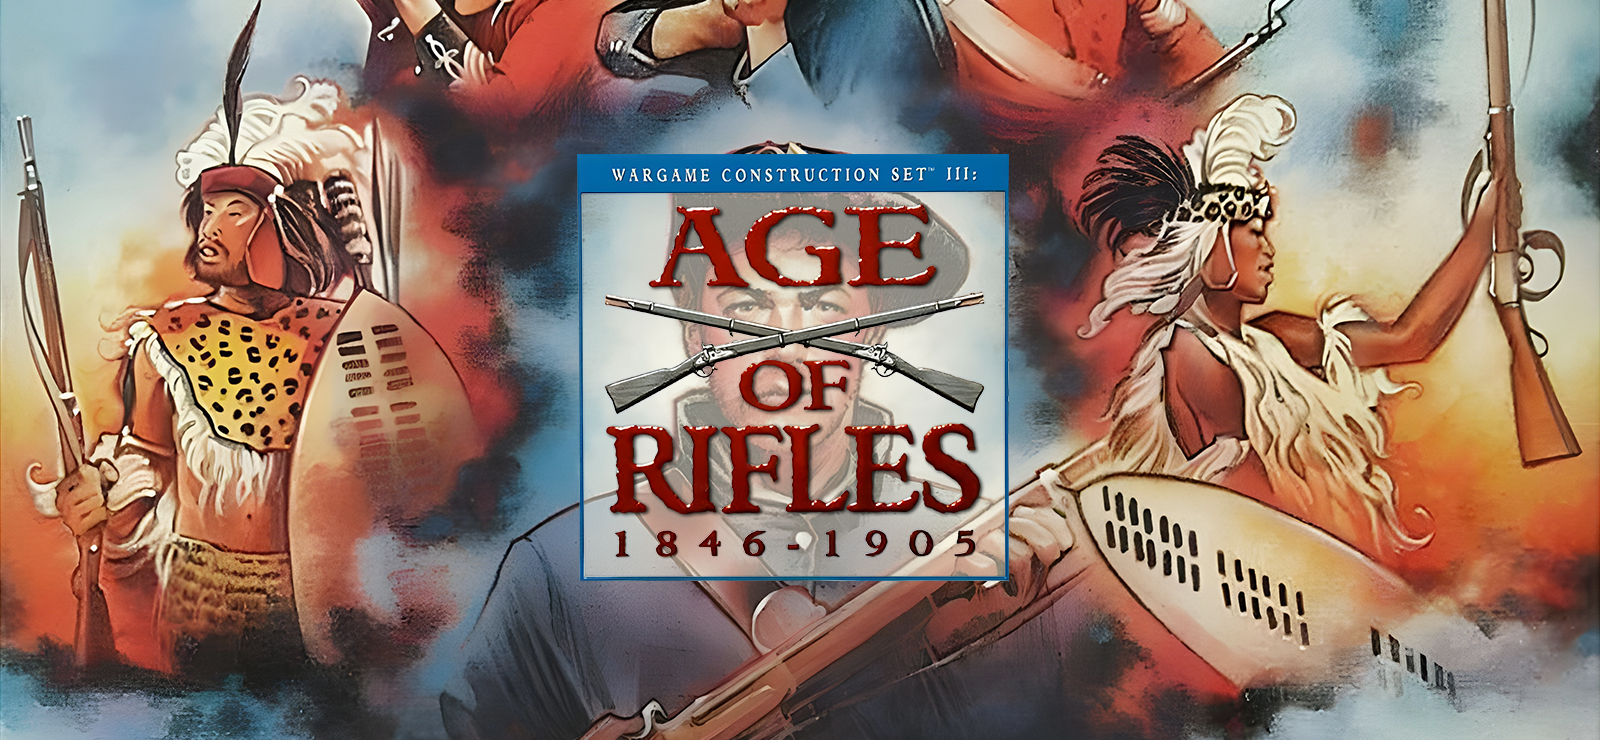 Wargame Construction Set III: Age Of Rifles 1846-1905 + Campaigns